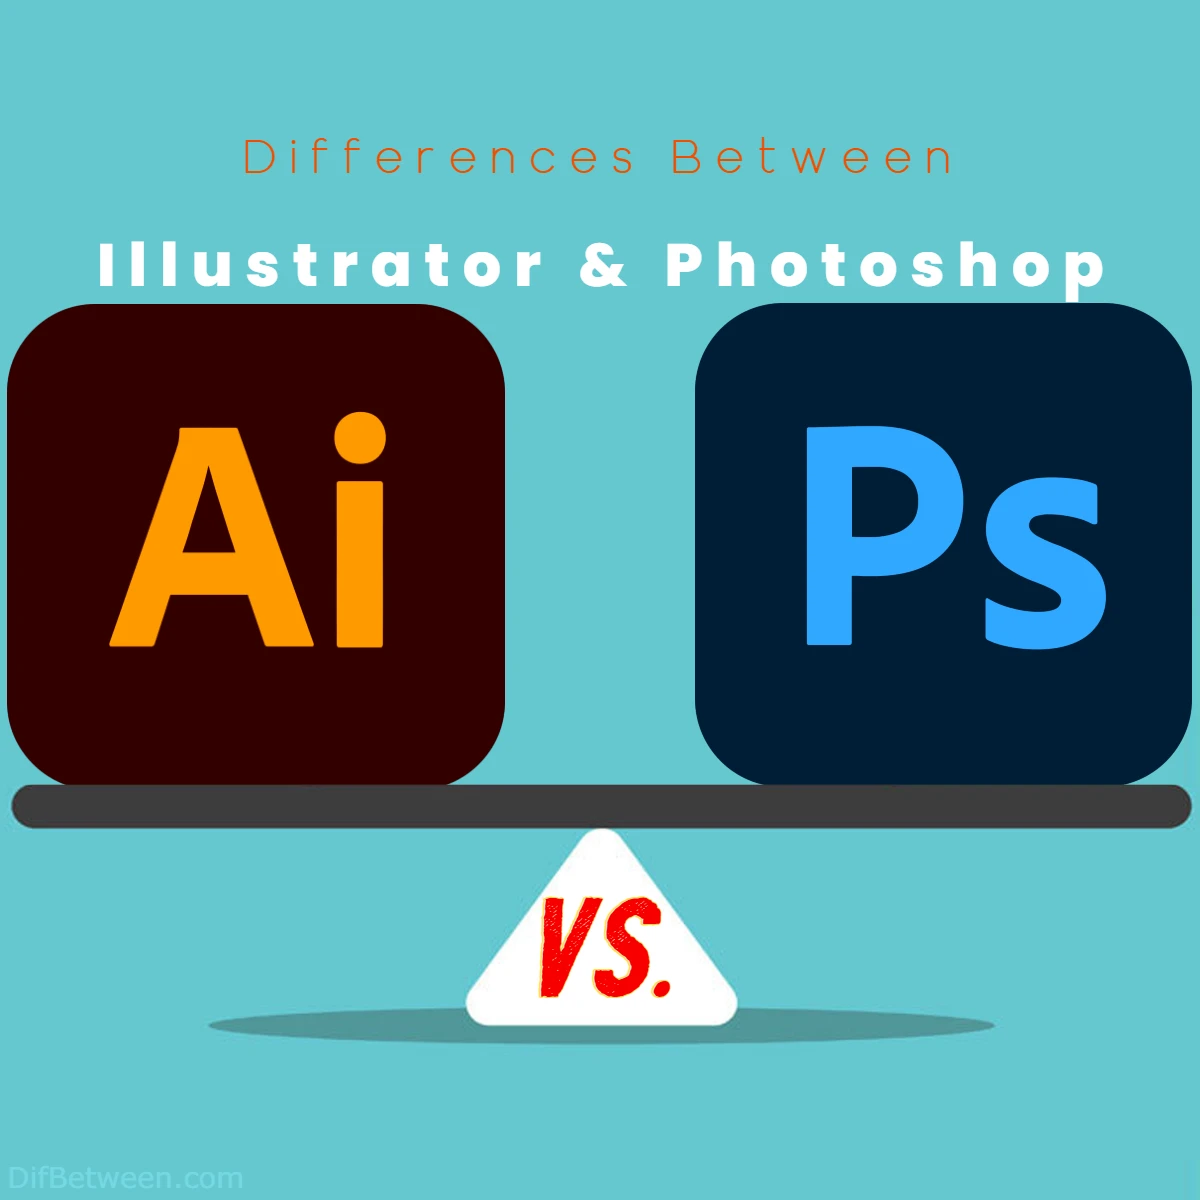 Difference Between Adobe Photoshop and Adobe Illustrator